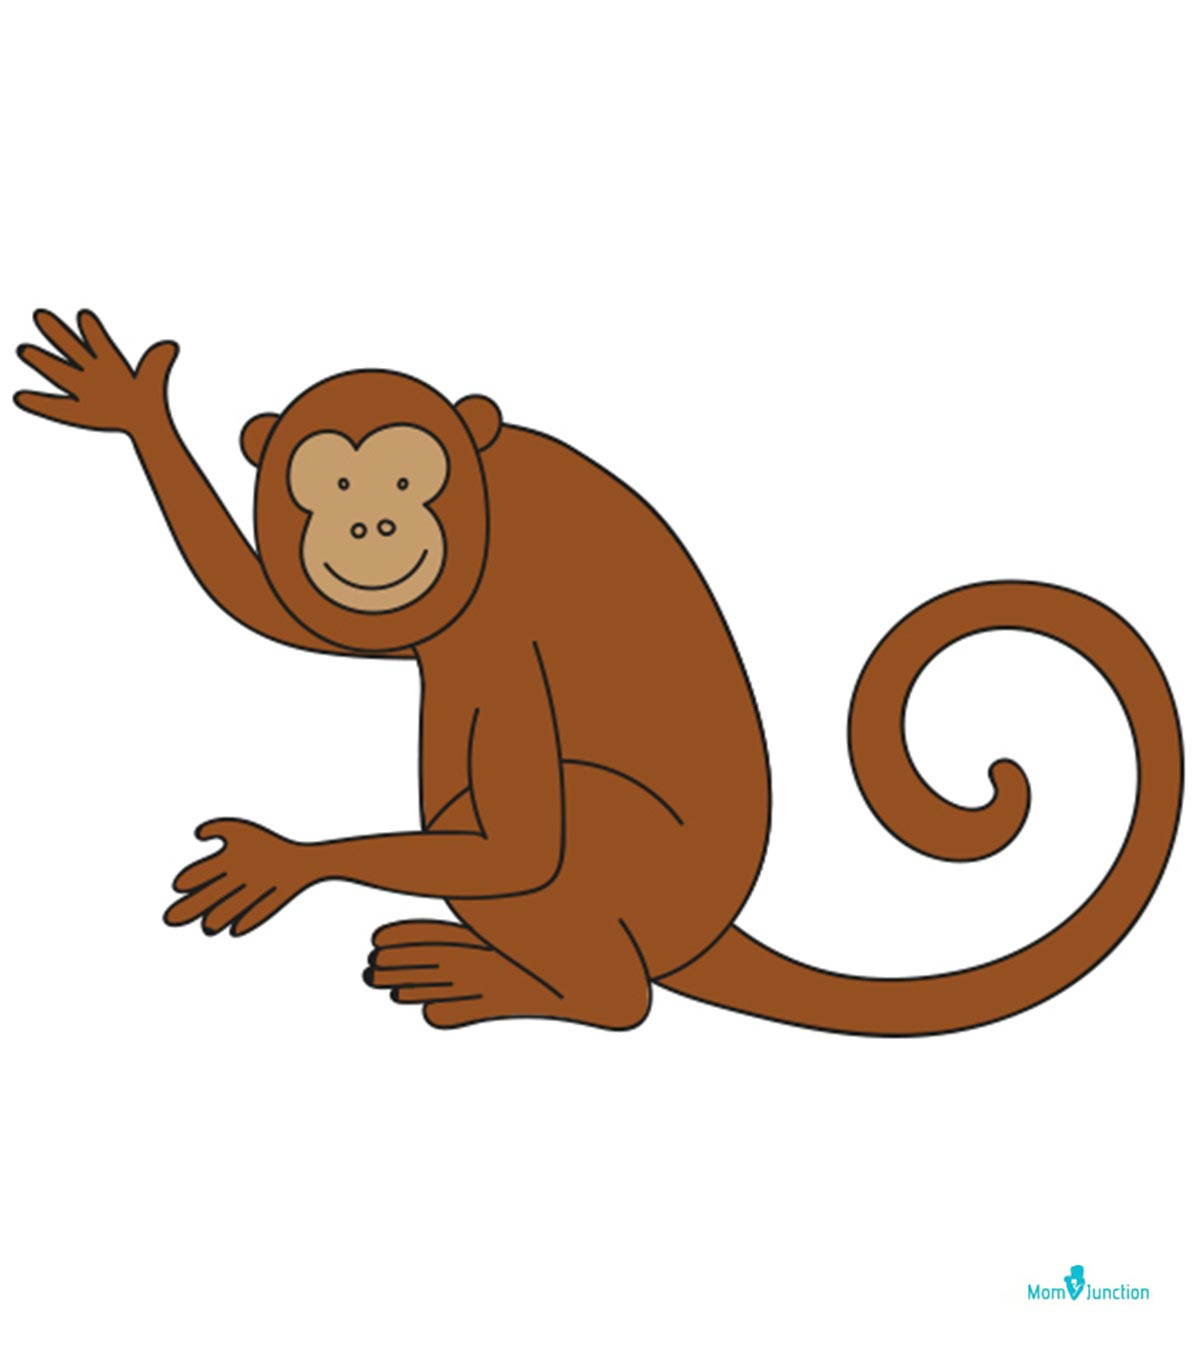 How To Draw A Monkey Realistic Easy